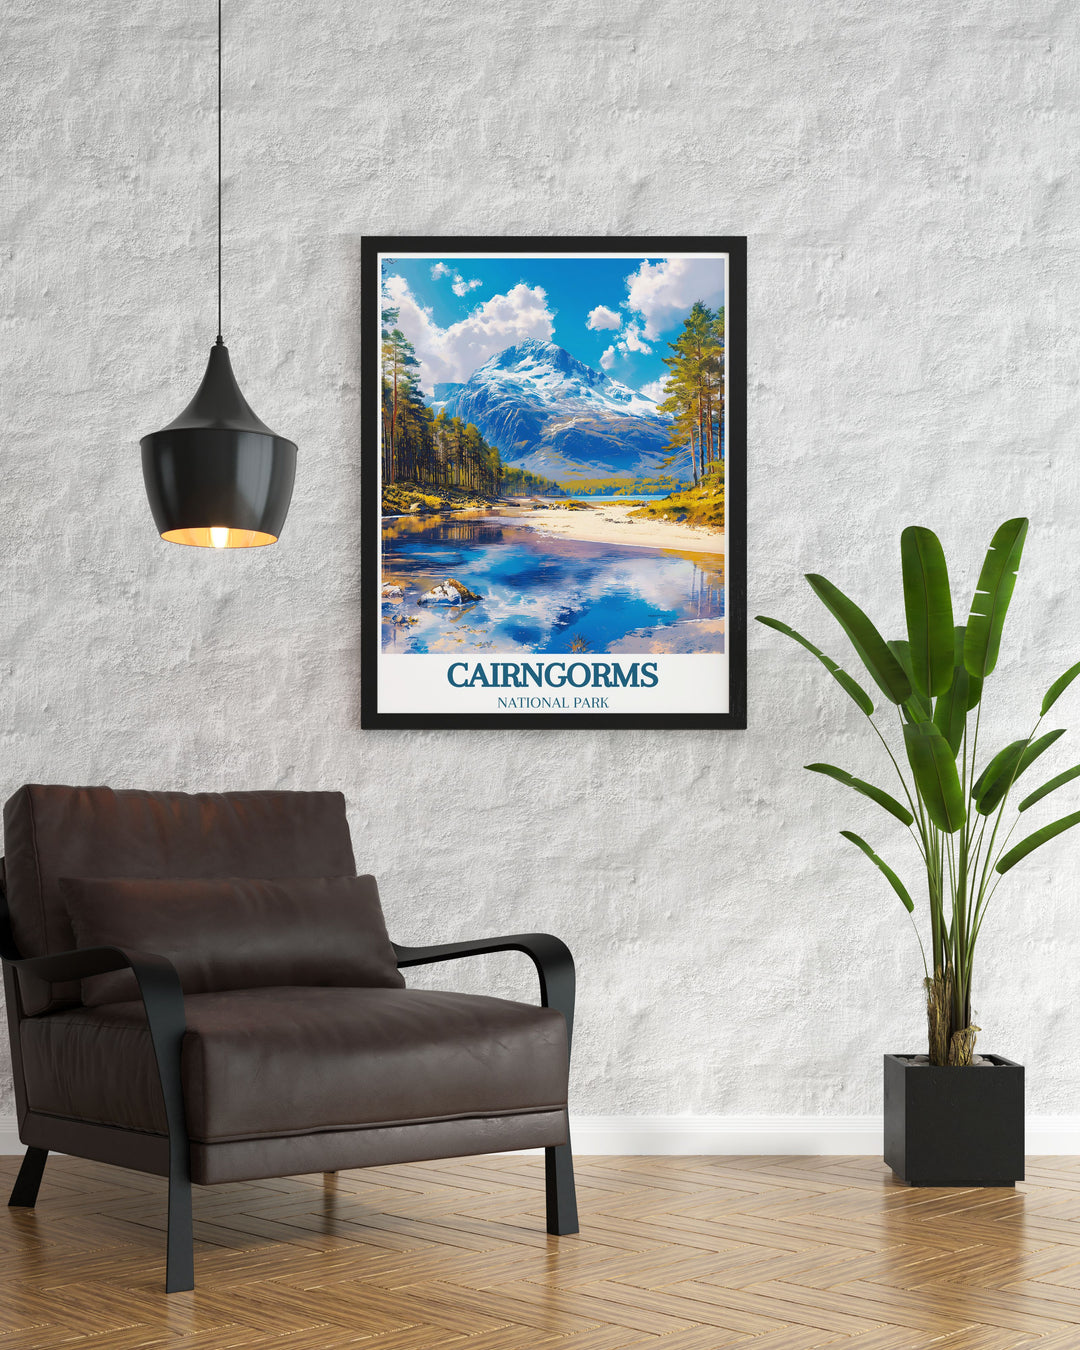 This poster showcases the enchanting landscapes of Cairngorms National Park and the spectacular views from Cairngorm Mountain, adding a unique touch of Scotlands historical and natural beauty to your living space.